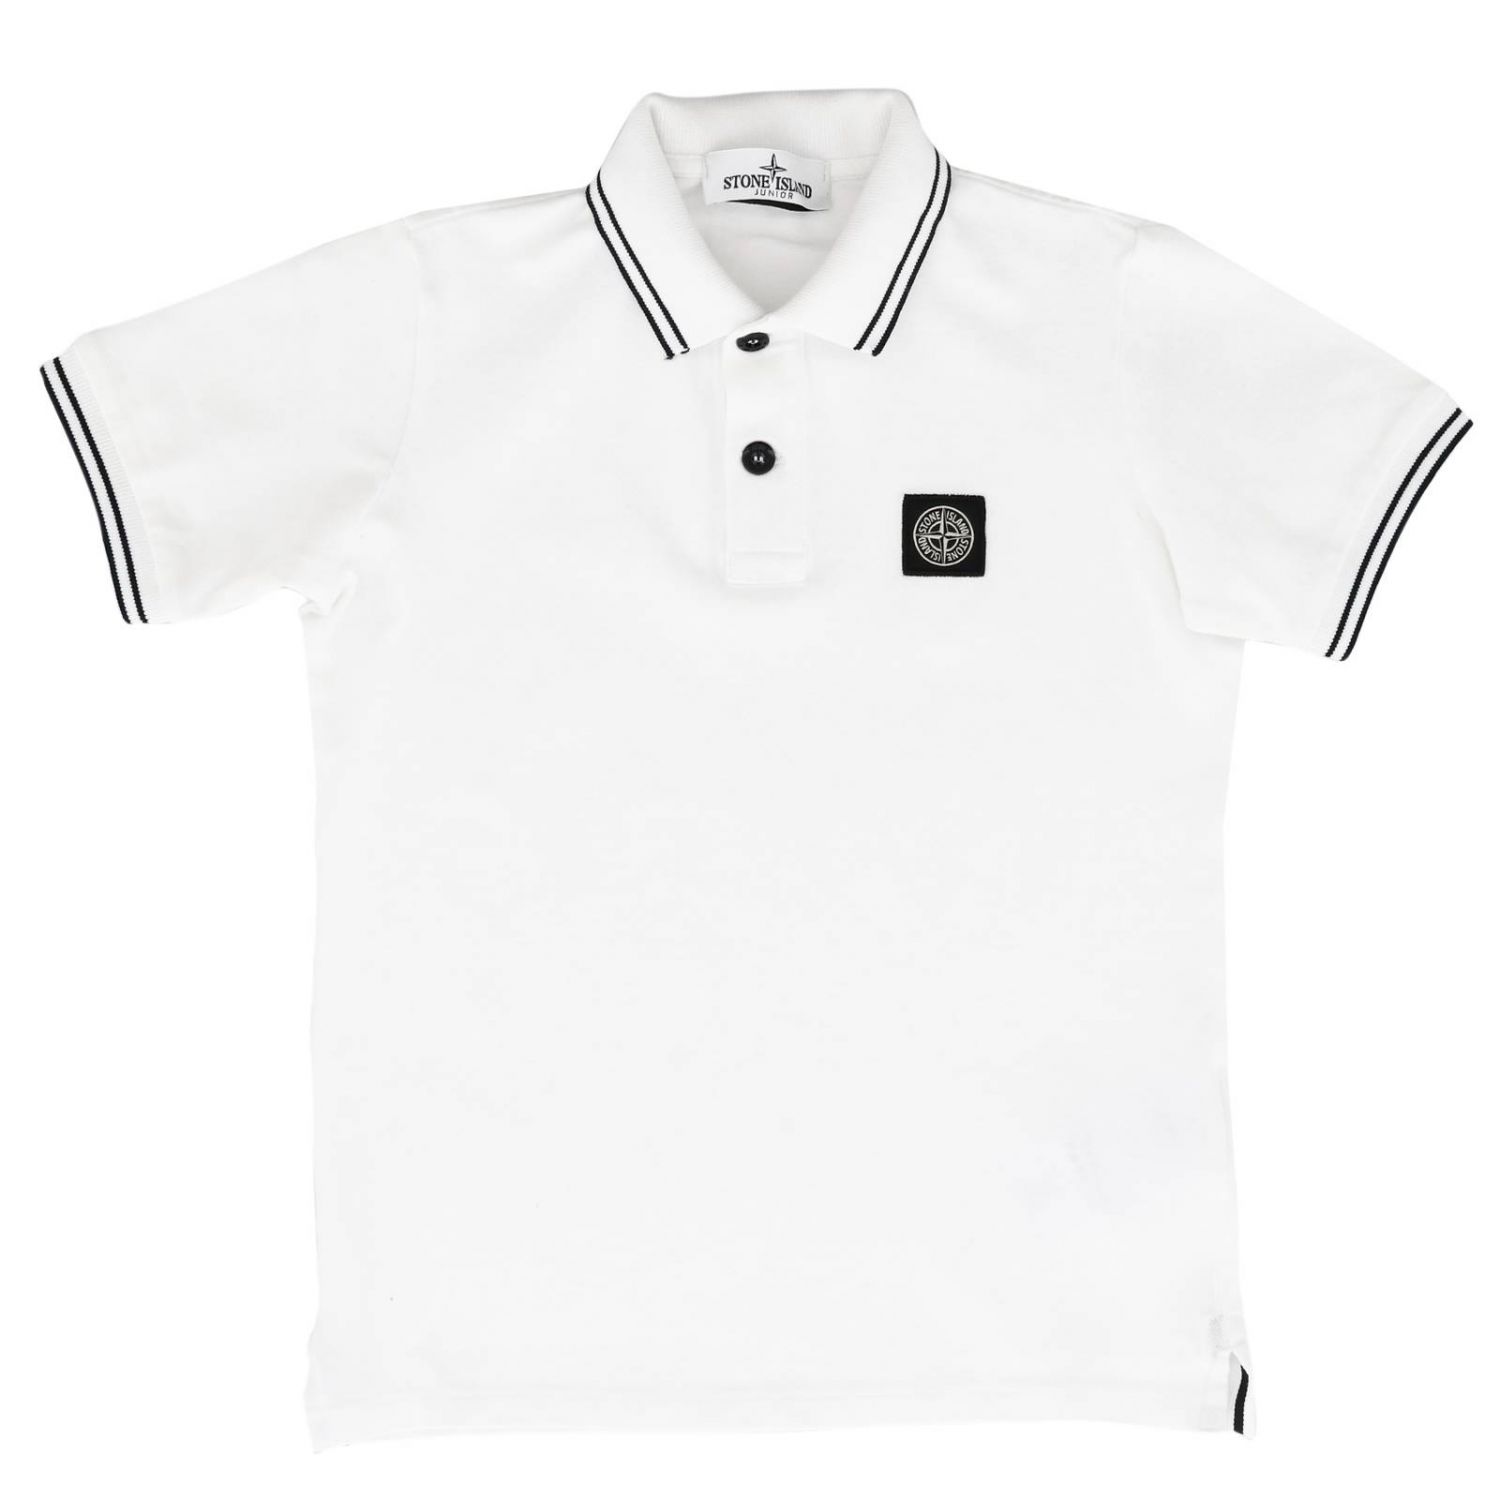 Stone Island Junior Outlet: t-shirt for boys - White | Stone Island ...